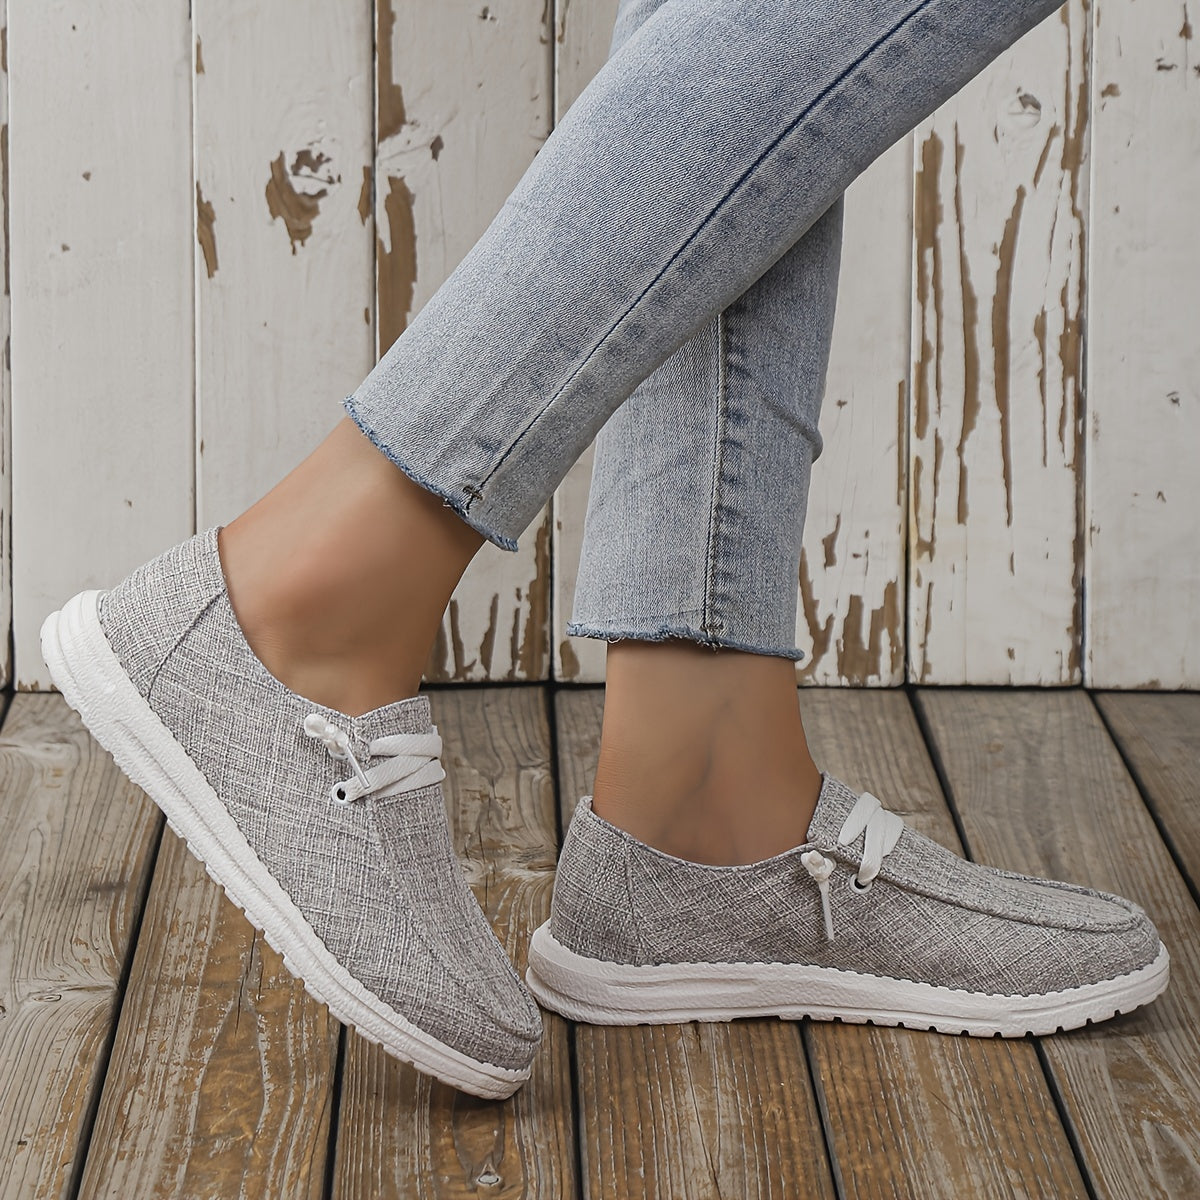 Lightweight Slip On Sneakers, Solid Color Flat Shoes